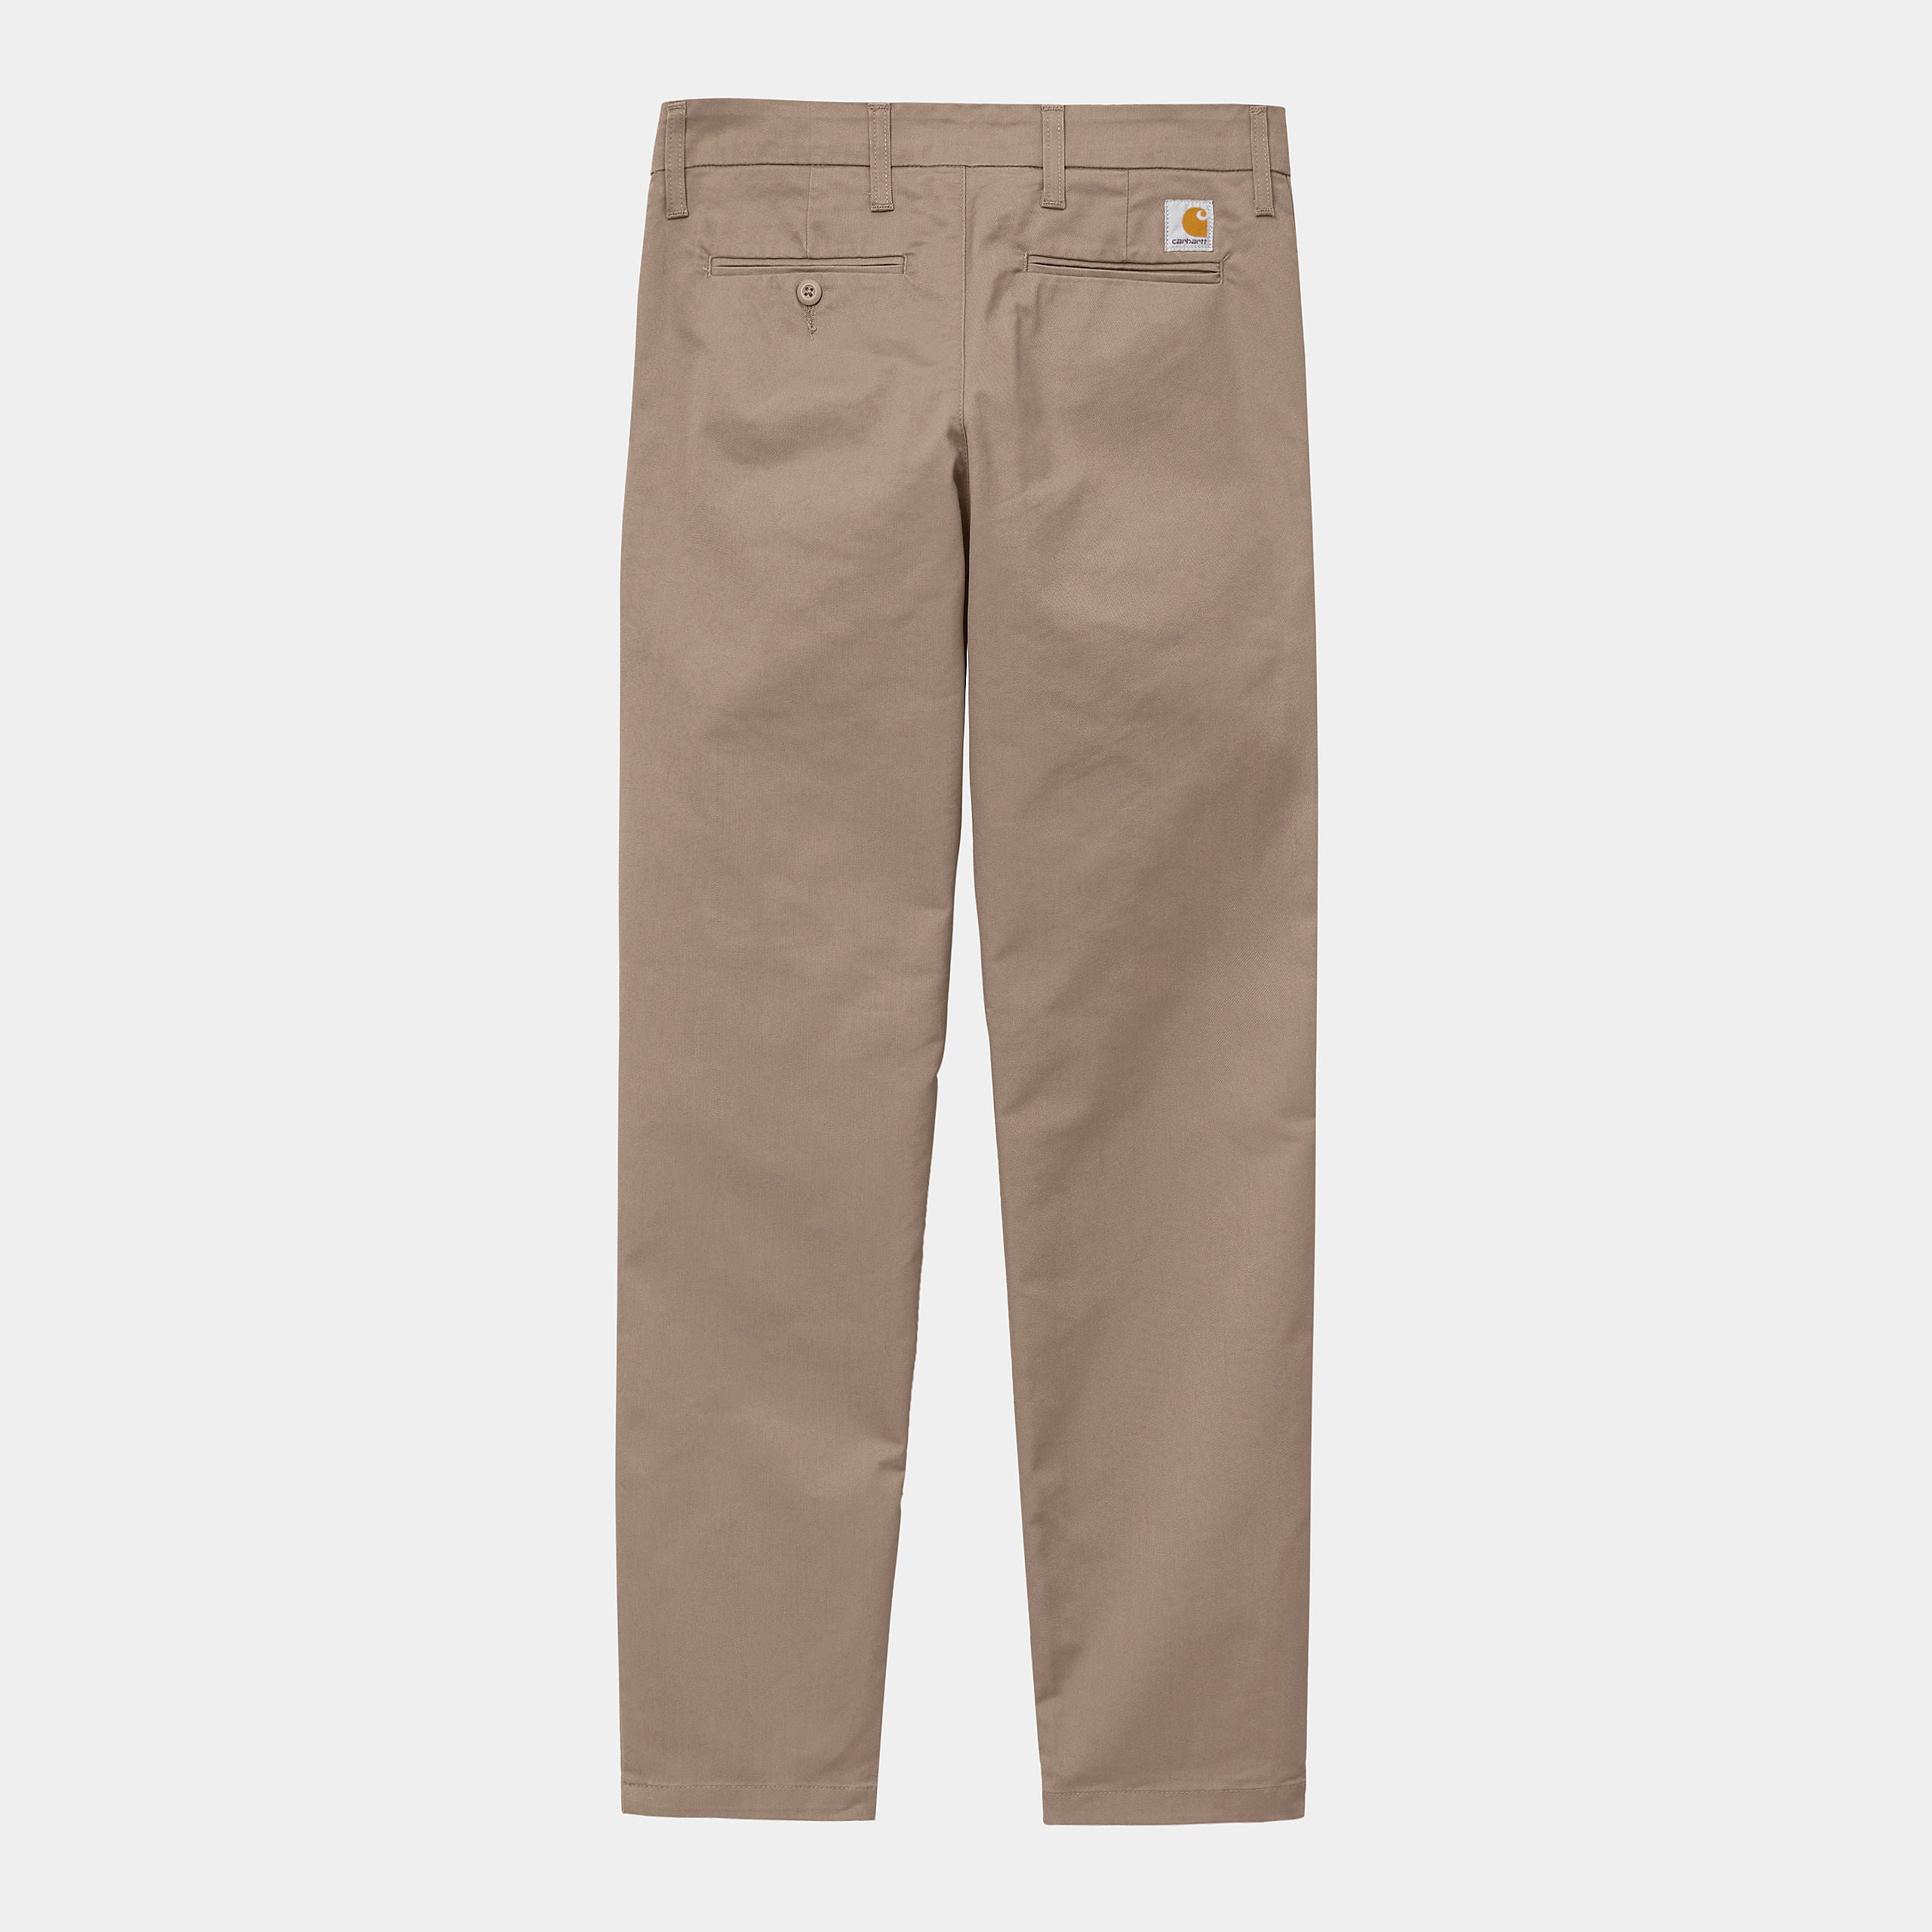 Carhartt Mens Sid Pant - Leather Rinsed - The Foot Factory